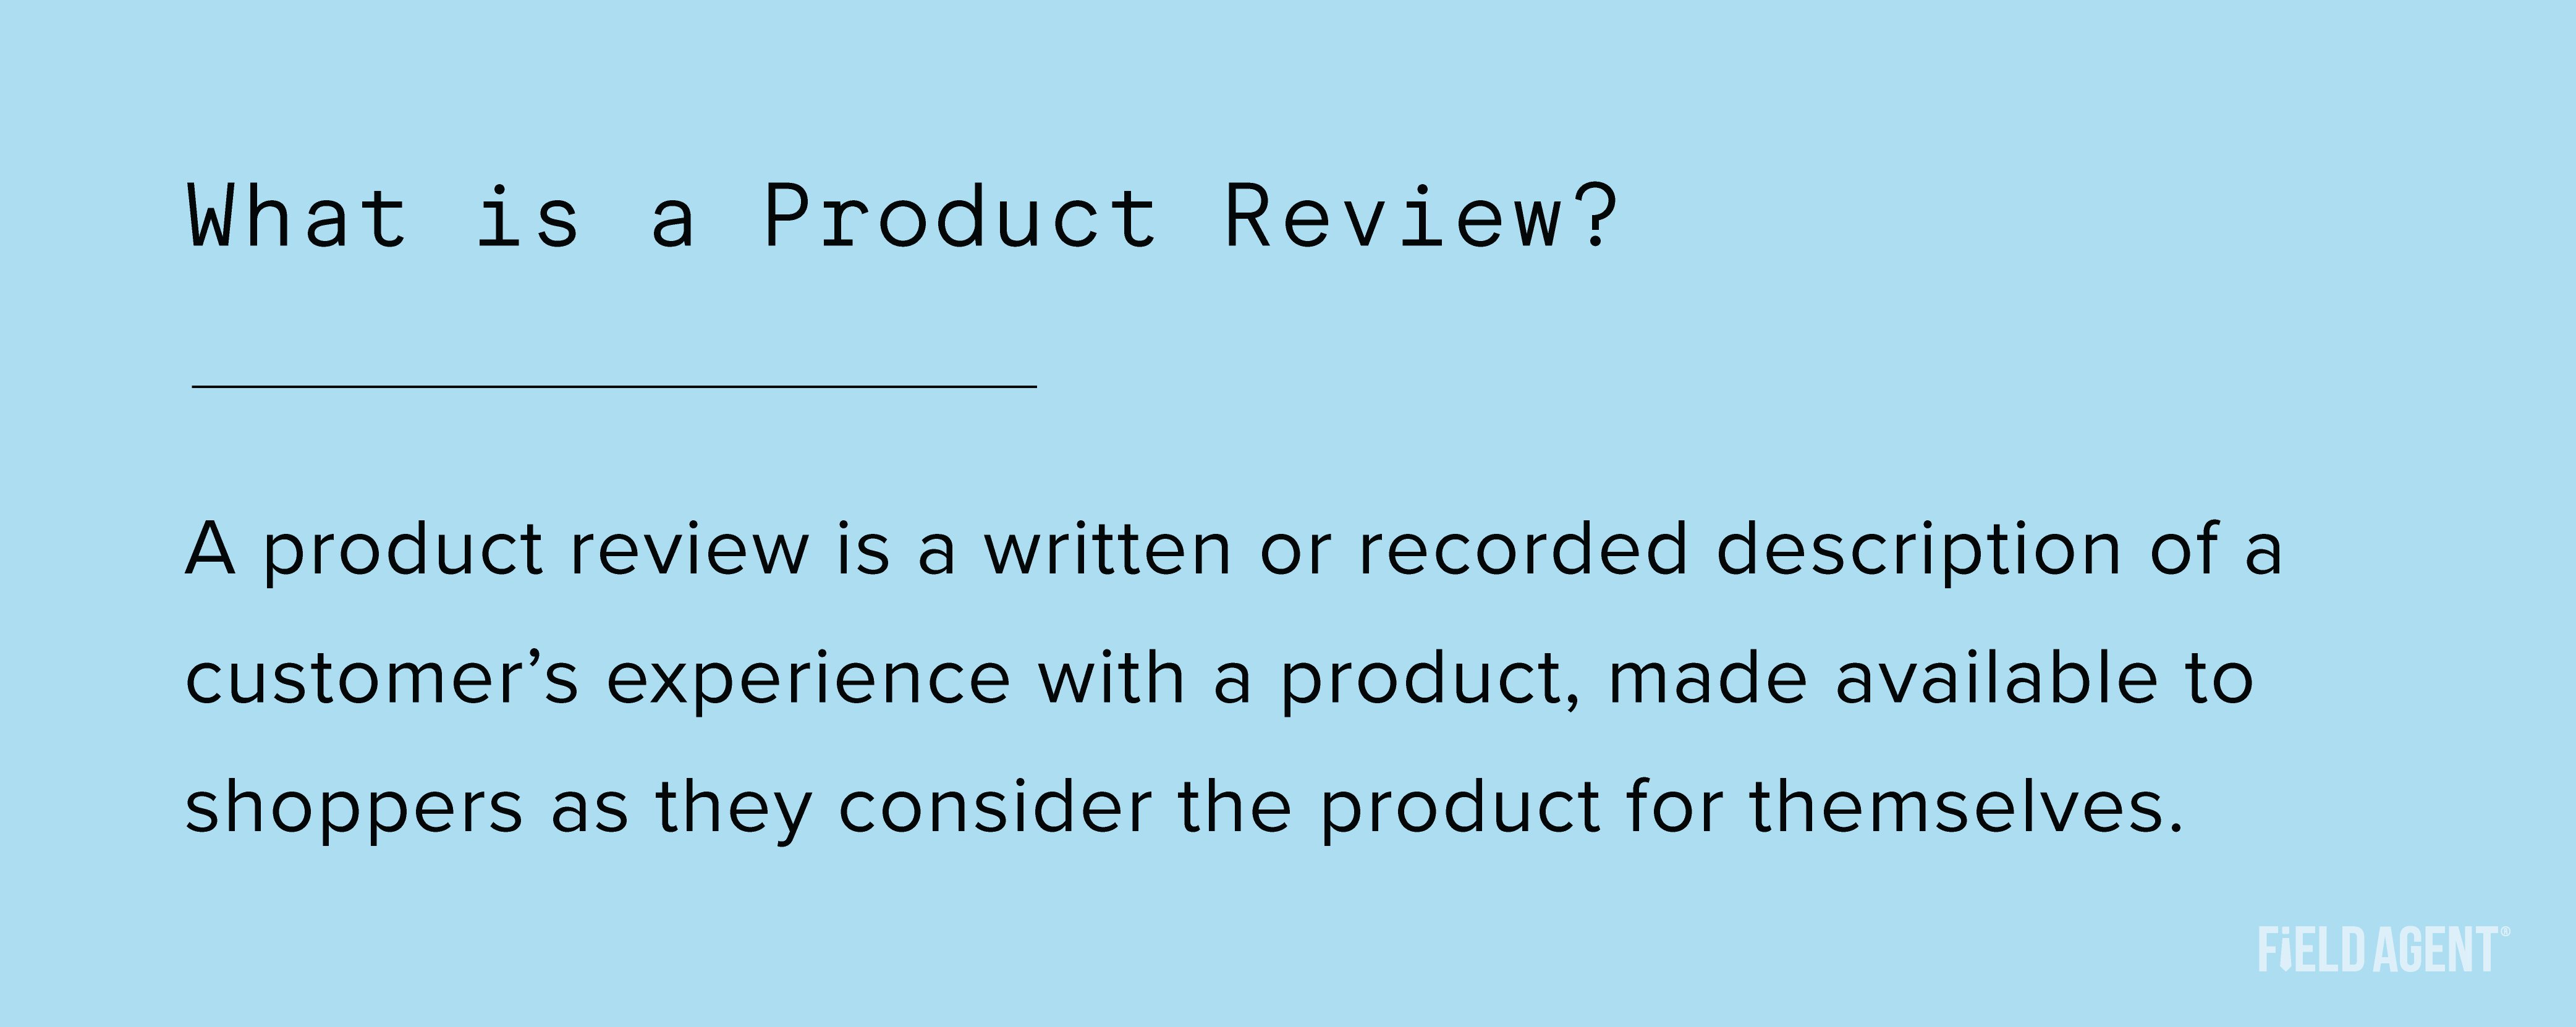 Definition of a product review